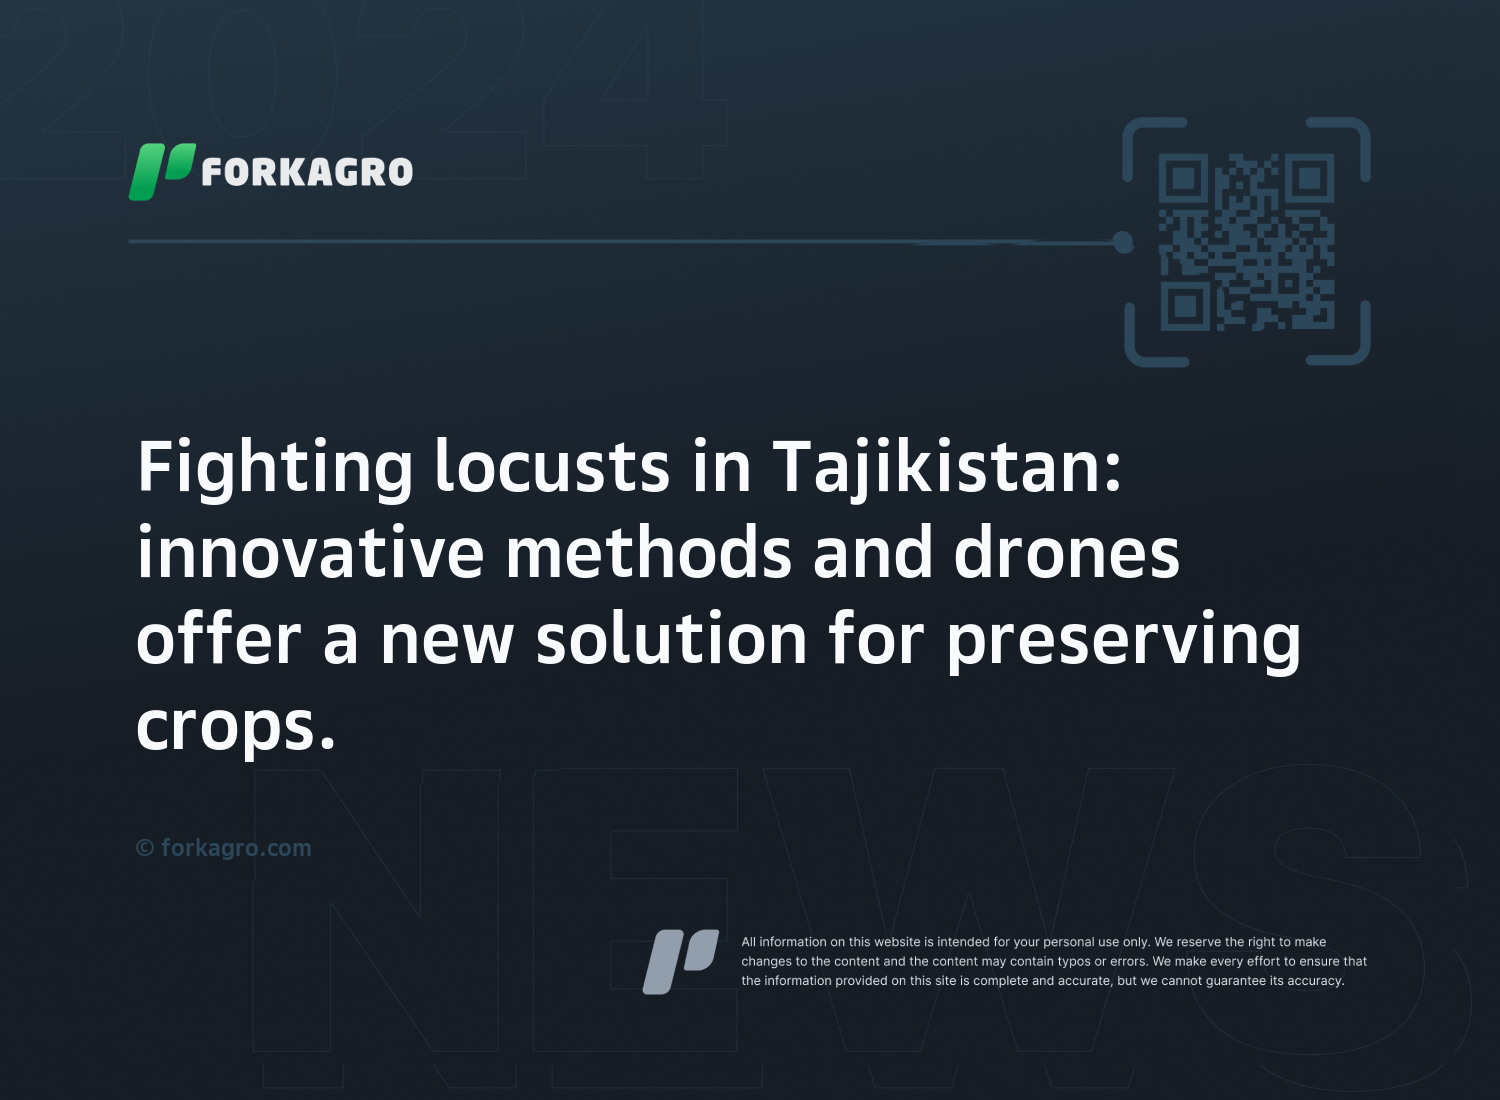 Fighting locusts in Tajikistan: innovative methods and drones offer a new solution for preserving crops.